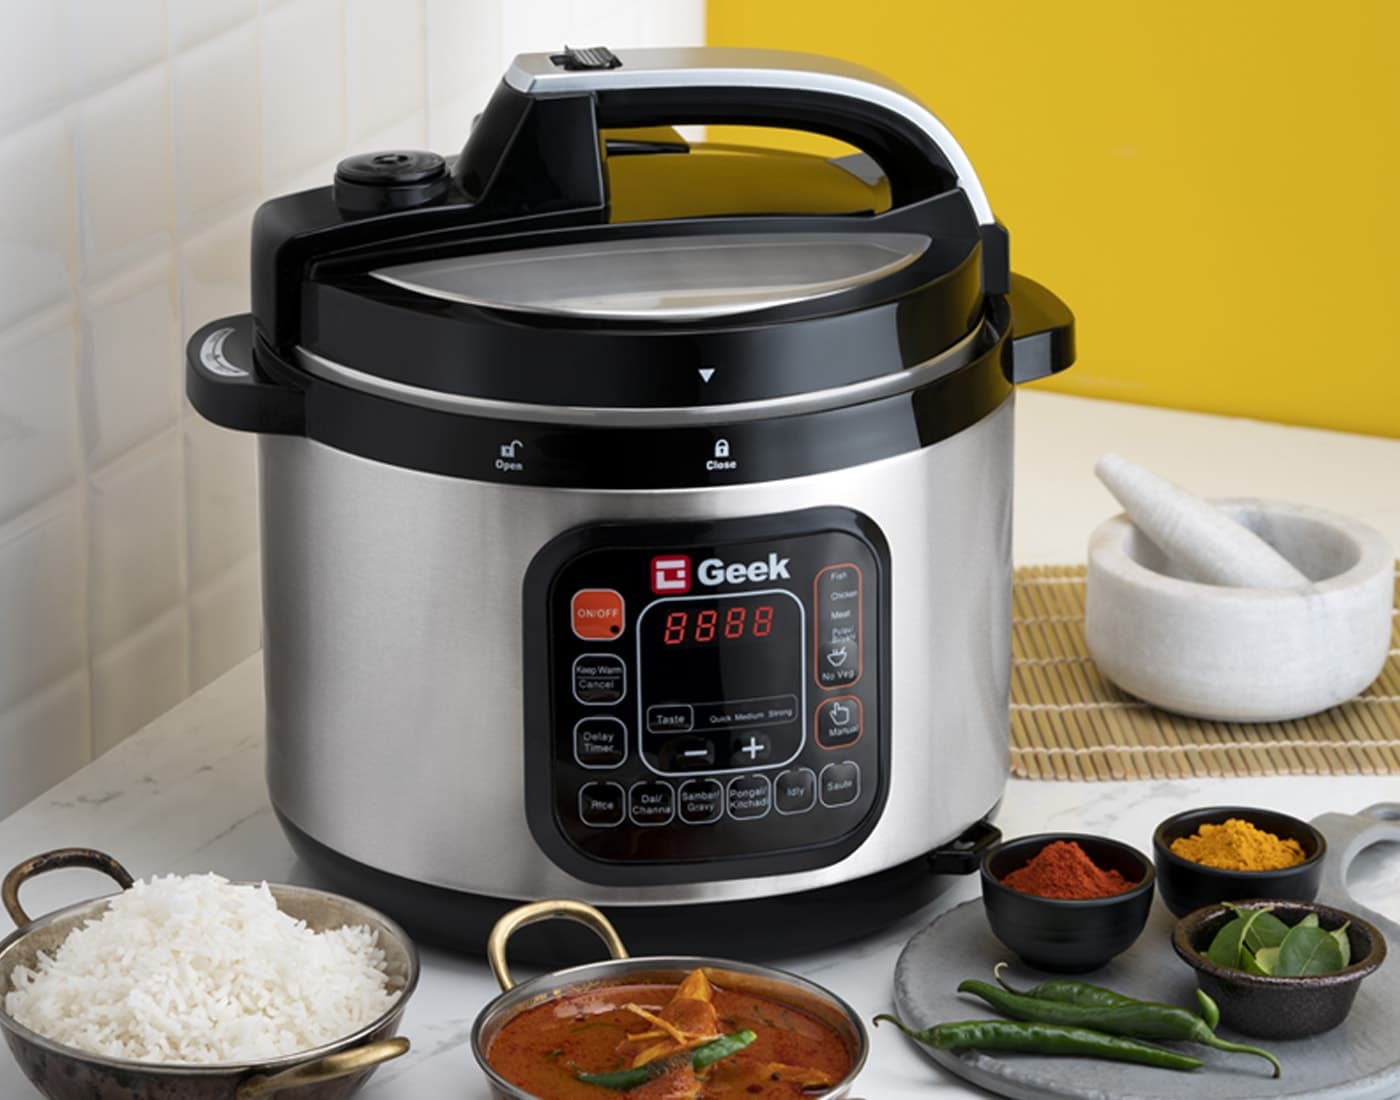 Make steamed rice and delicious fish curry with Geek Robocook Zeta Automatic Electric Pressure cooker